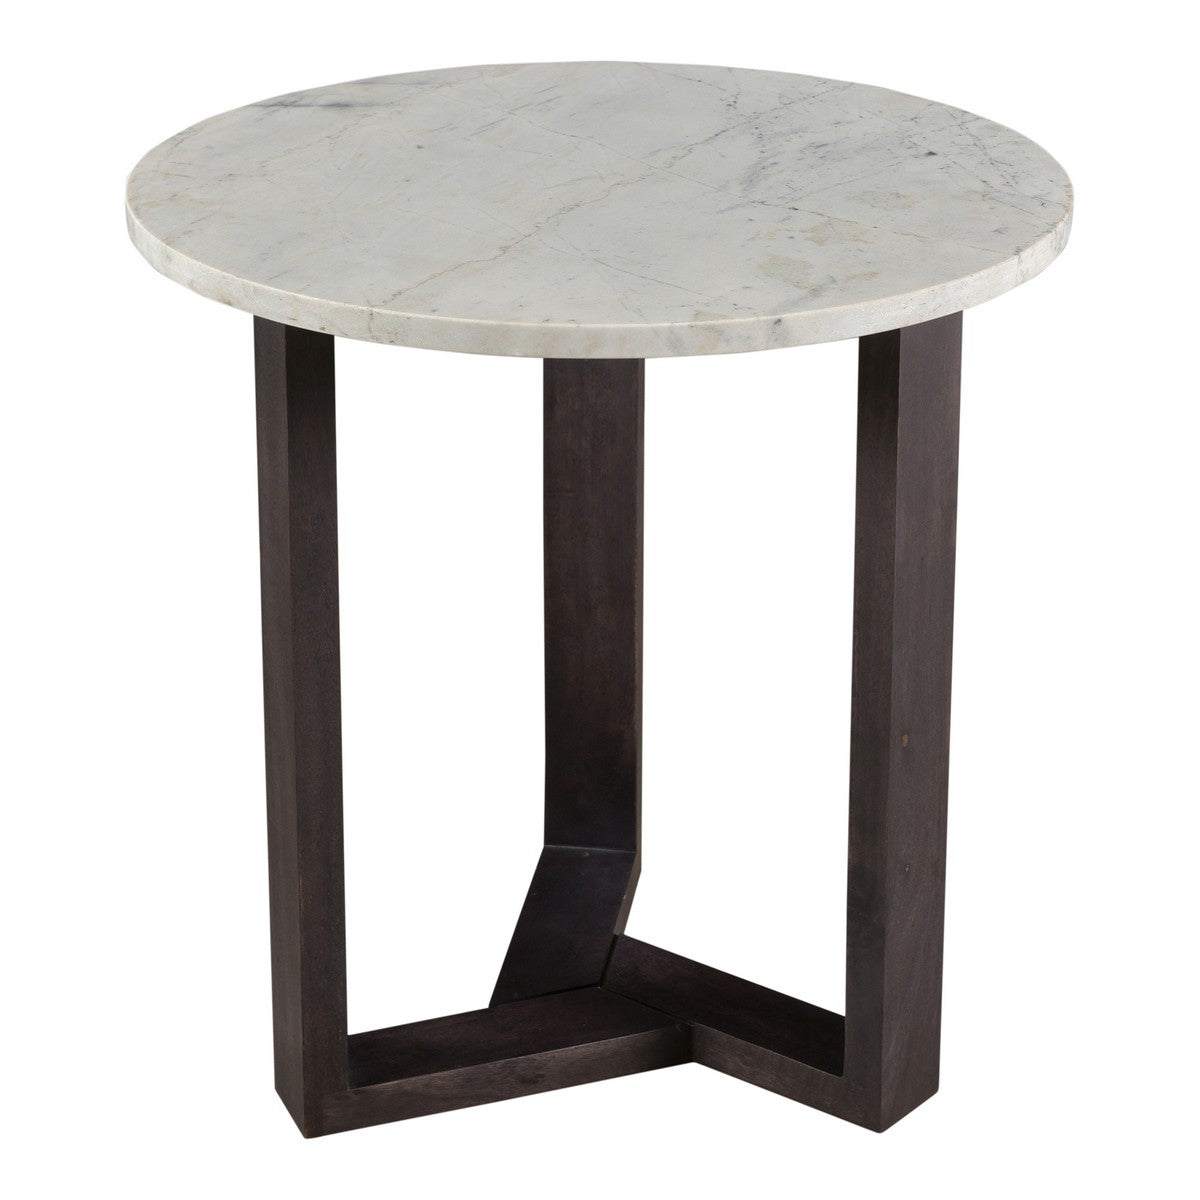 Moe's Home Collection Jinxx Side Table Charcoal Grey - JD-1019-07